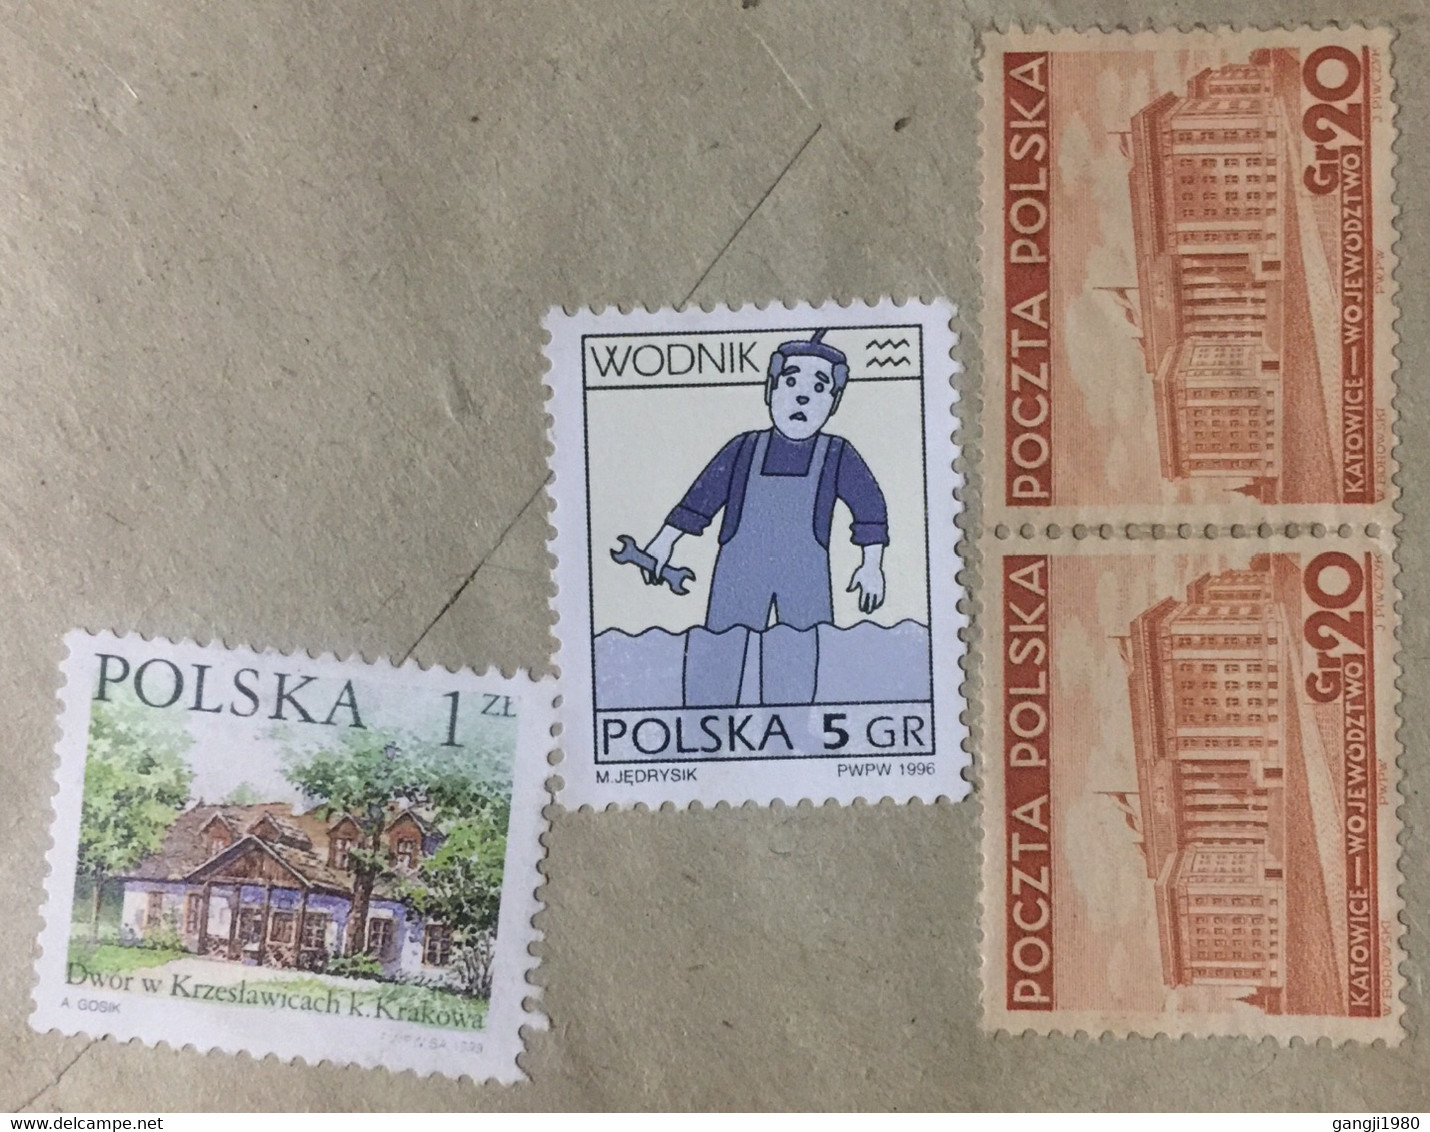 POLAND 2000, USED AIRMAIL COVER TO INDIA 4 DIFFERENT 1958 PICTURAL SPECIAL CANCELLATION, KATOWIDE ,HOUSE MUSIC,BUILDIN, - Lettres & Documents